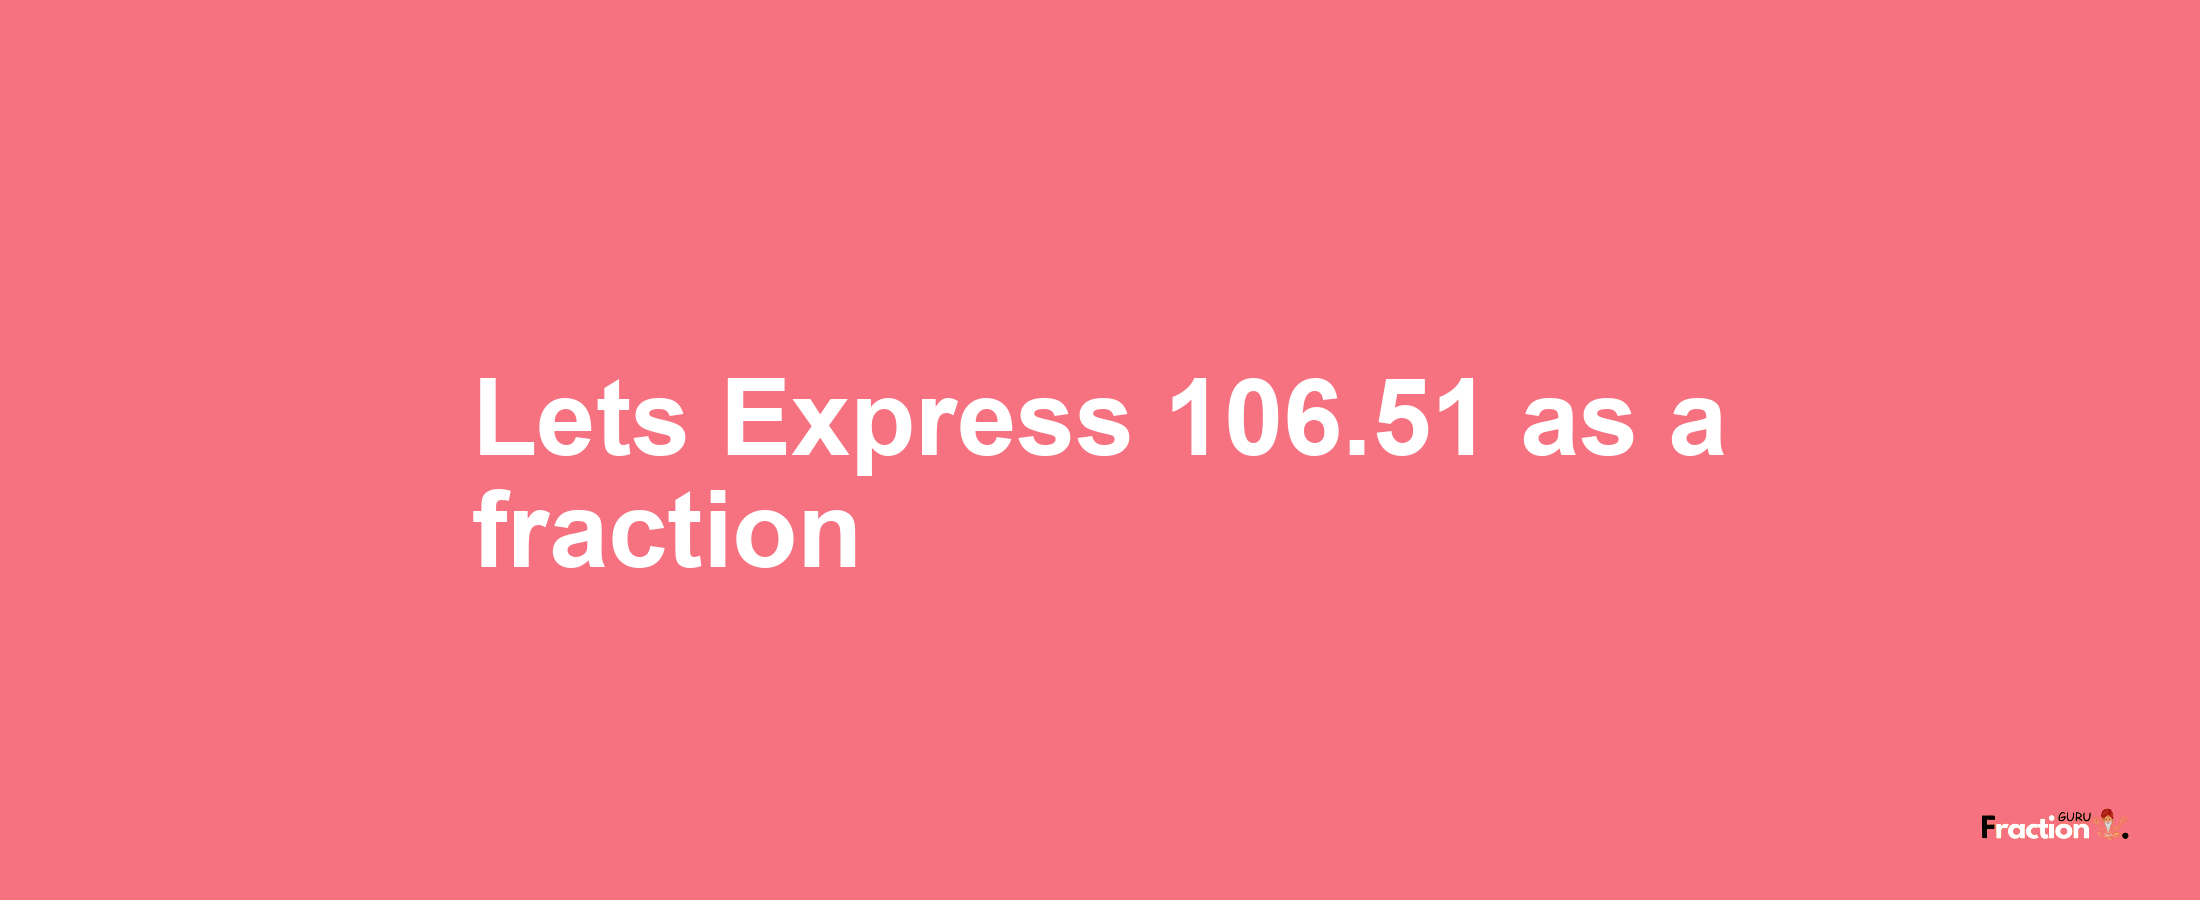 Lets Express 106.51 as afraction